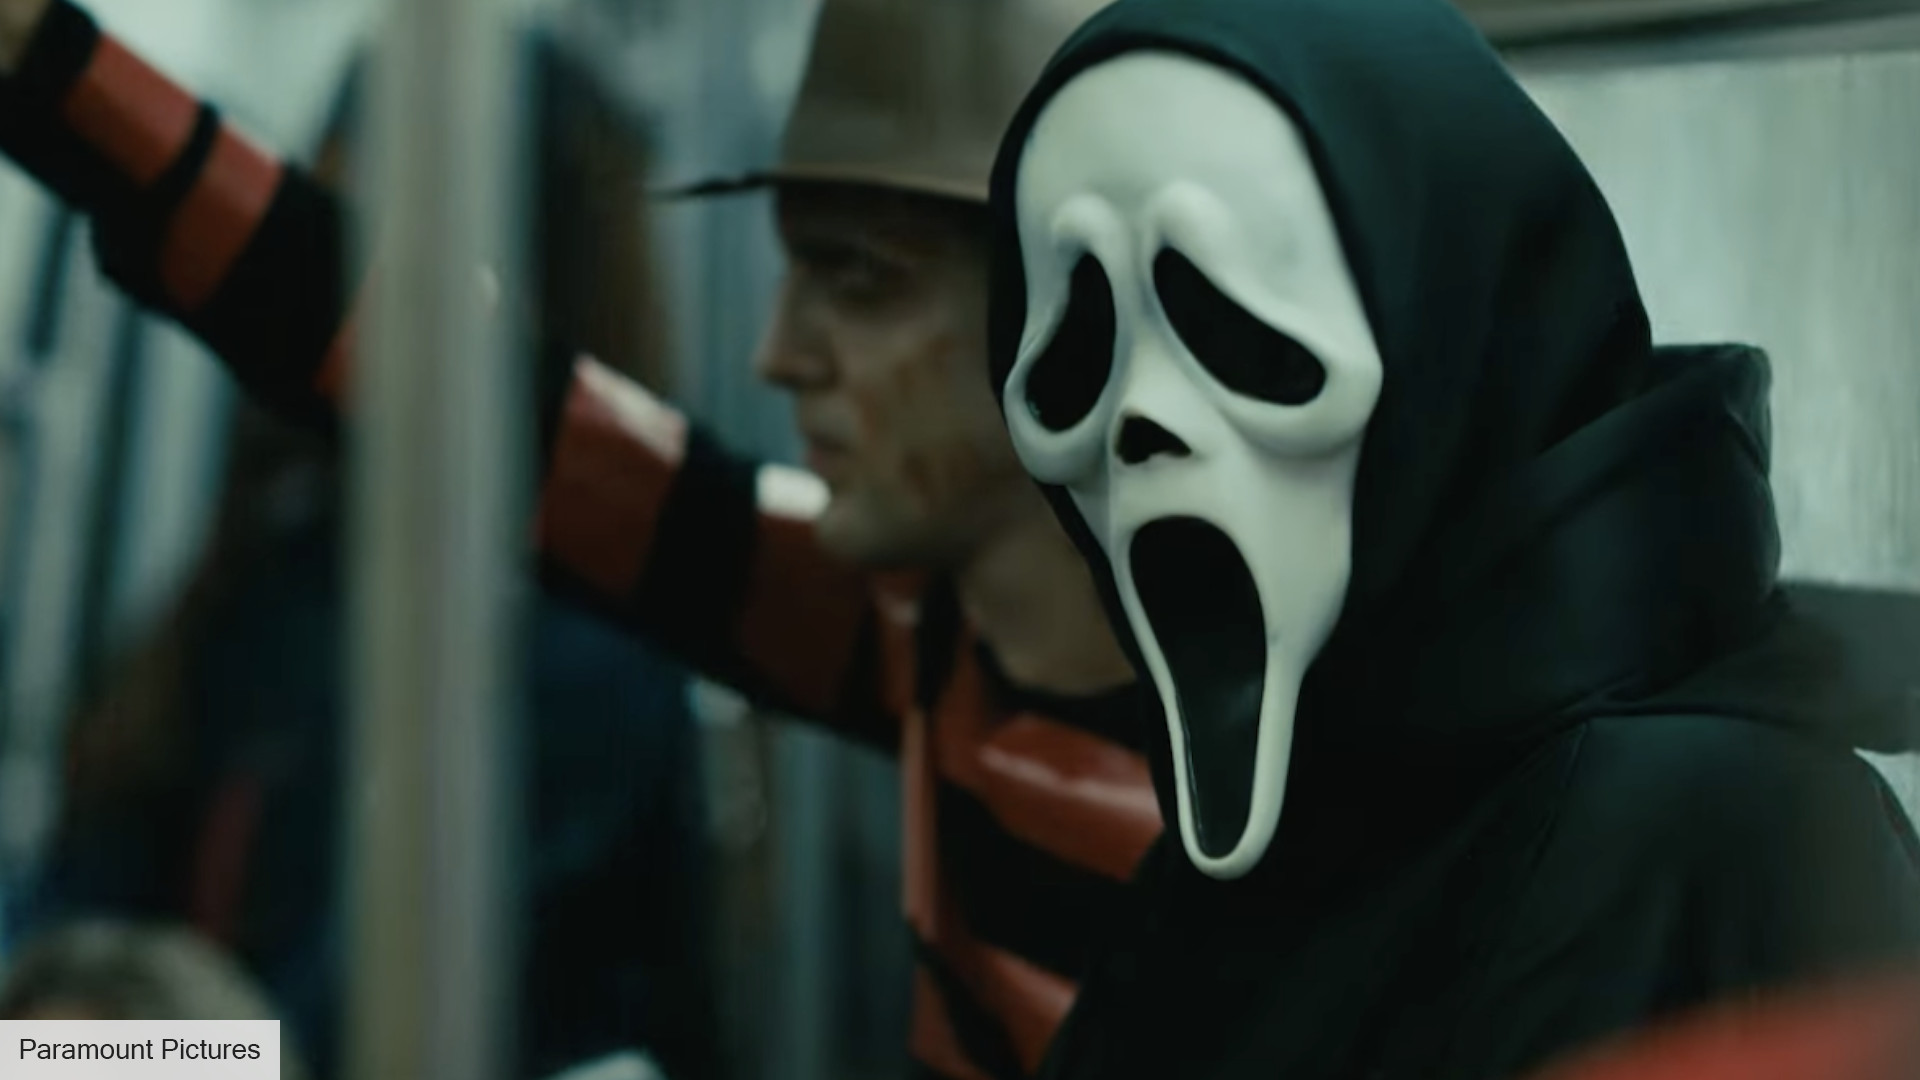 Fake Ghostfaces Are Appearing in Cities to Promote Scream 6